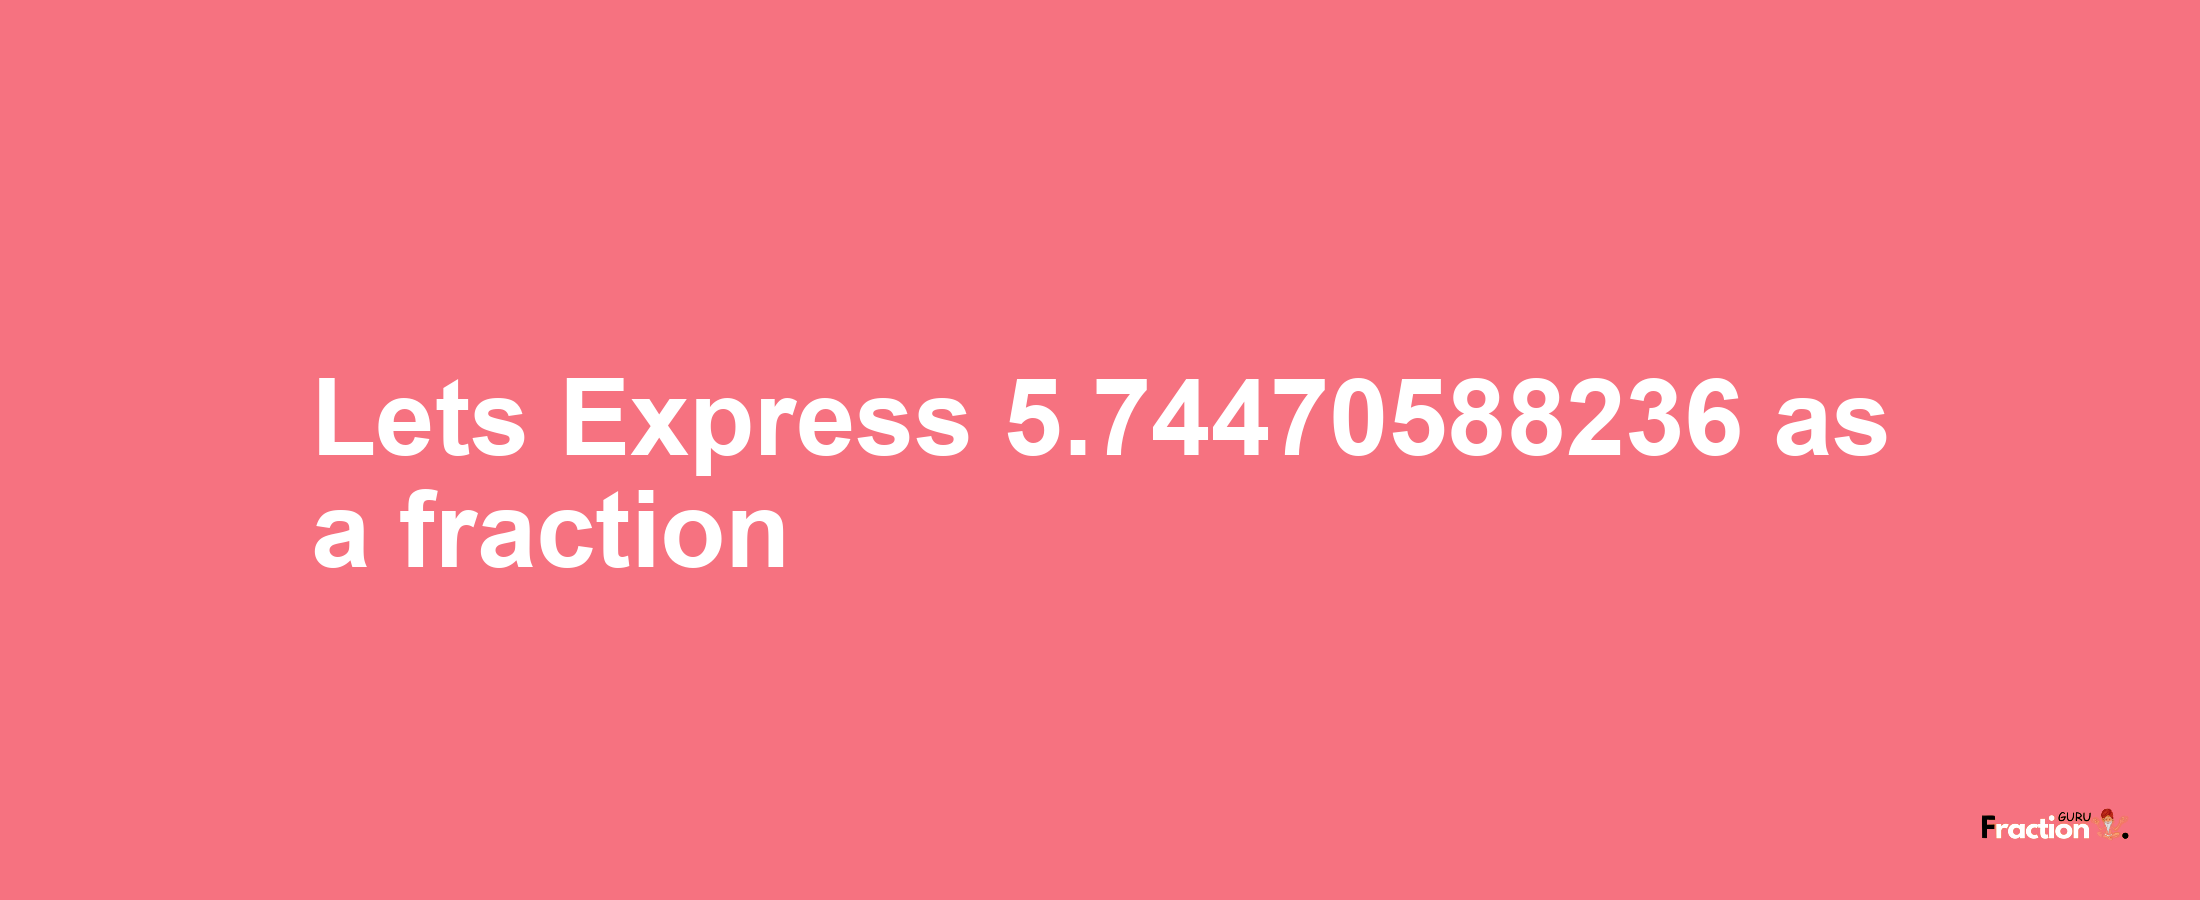 Lets Express 5.74470588236 as afraction